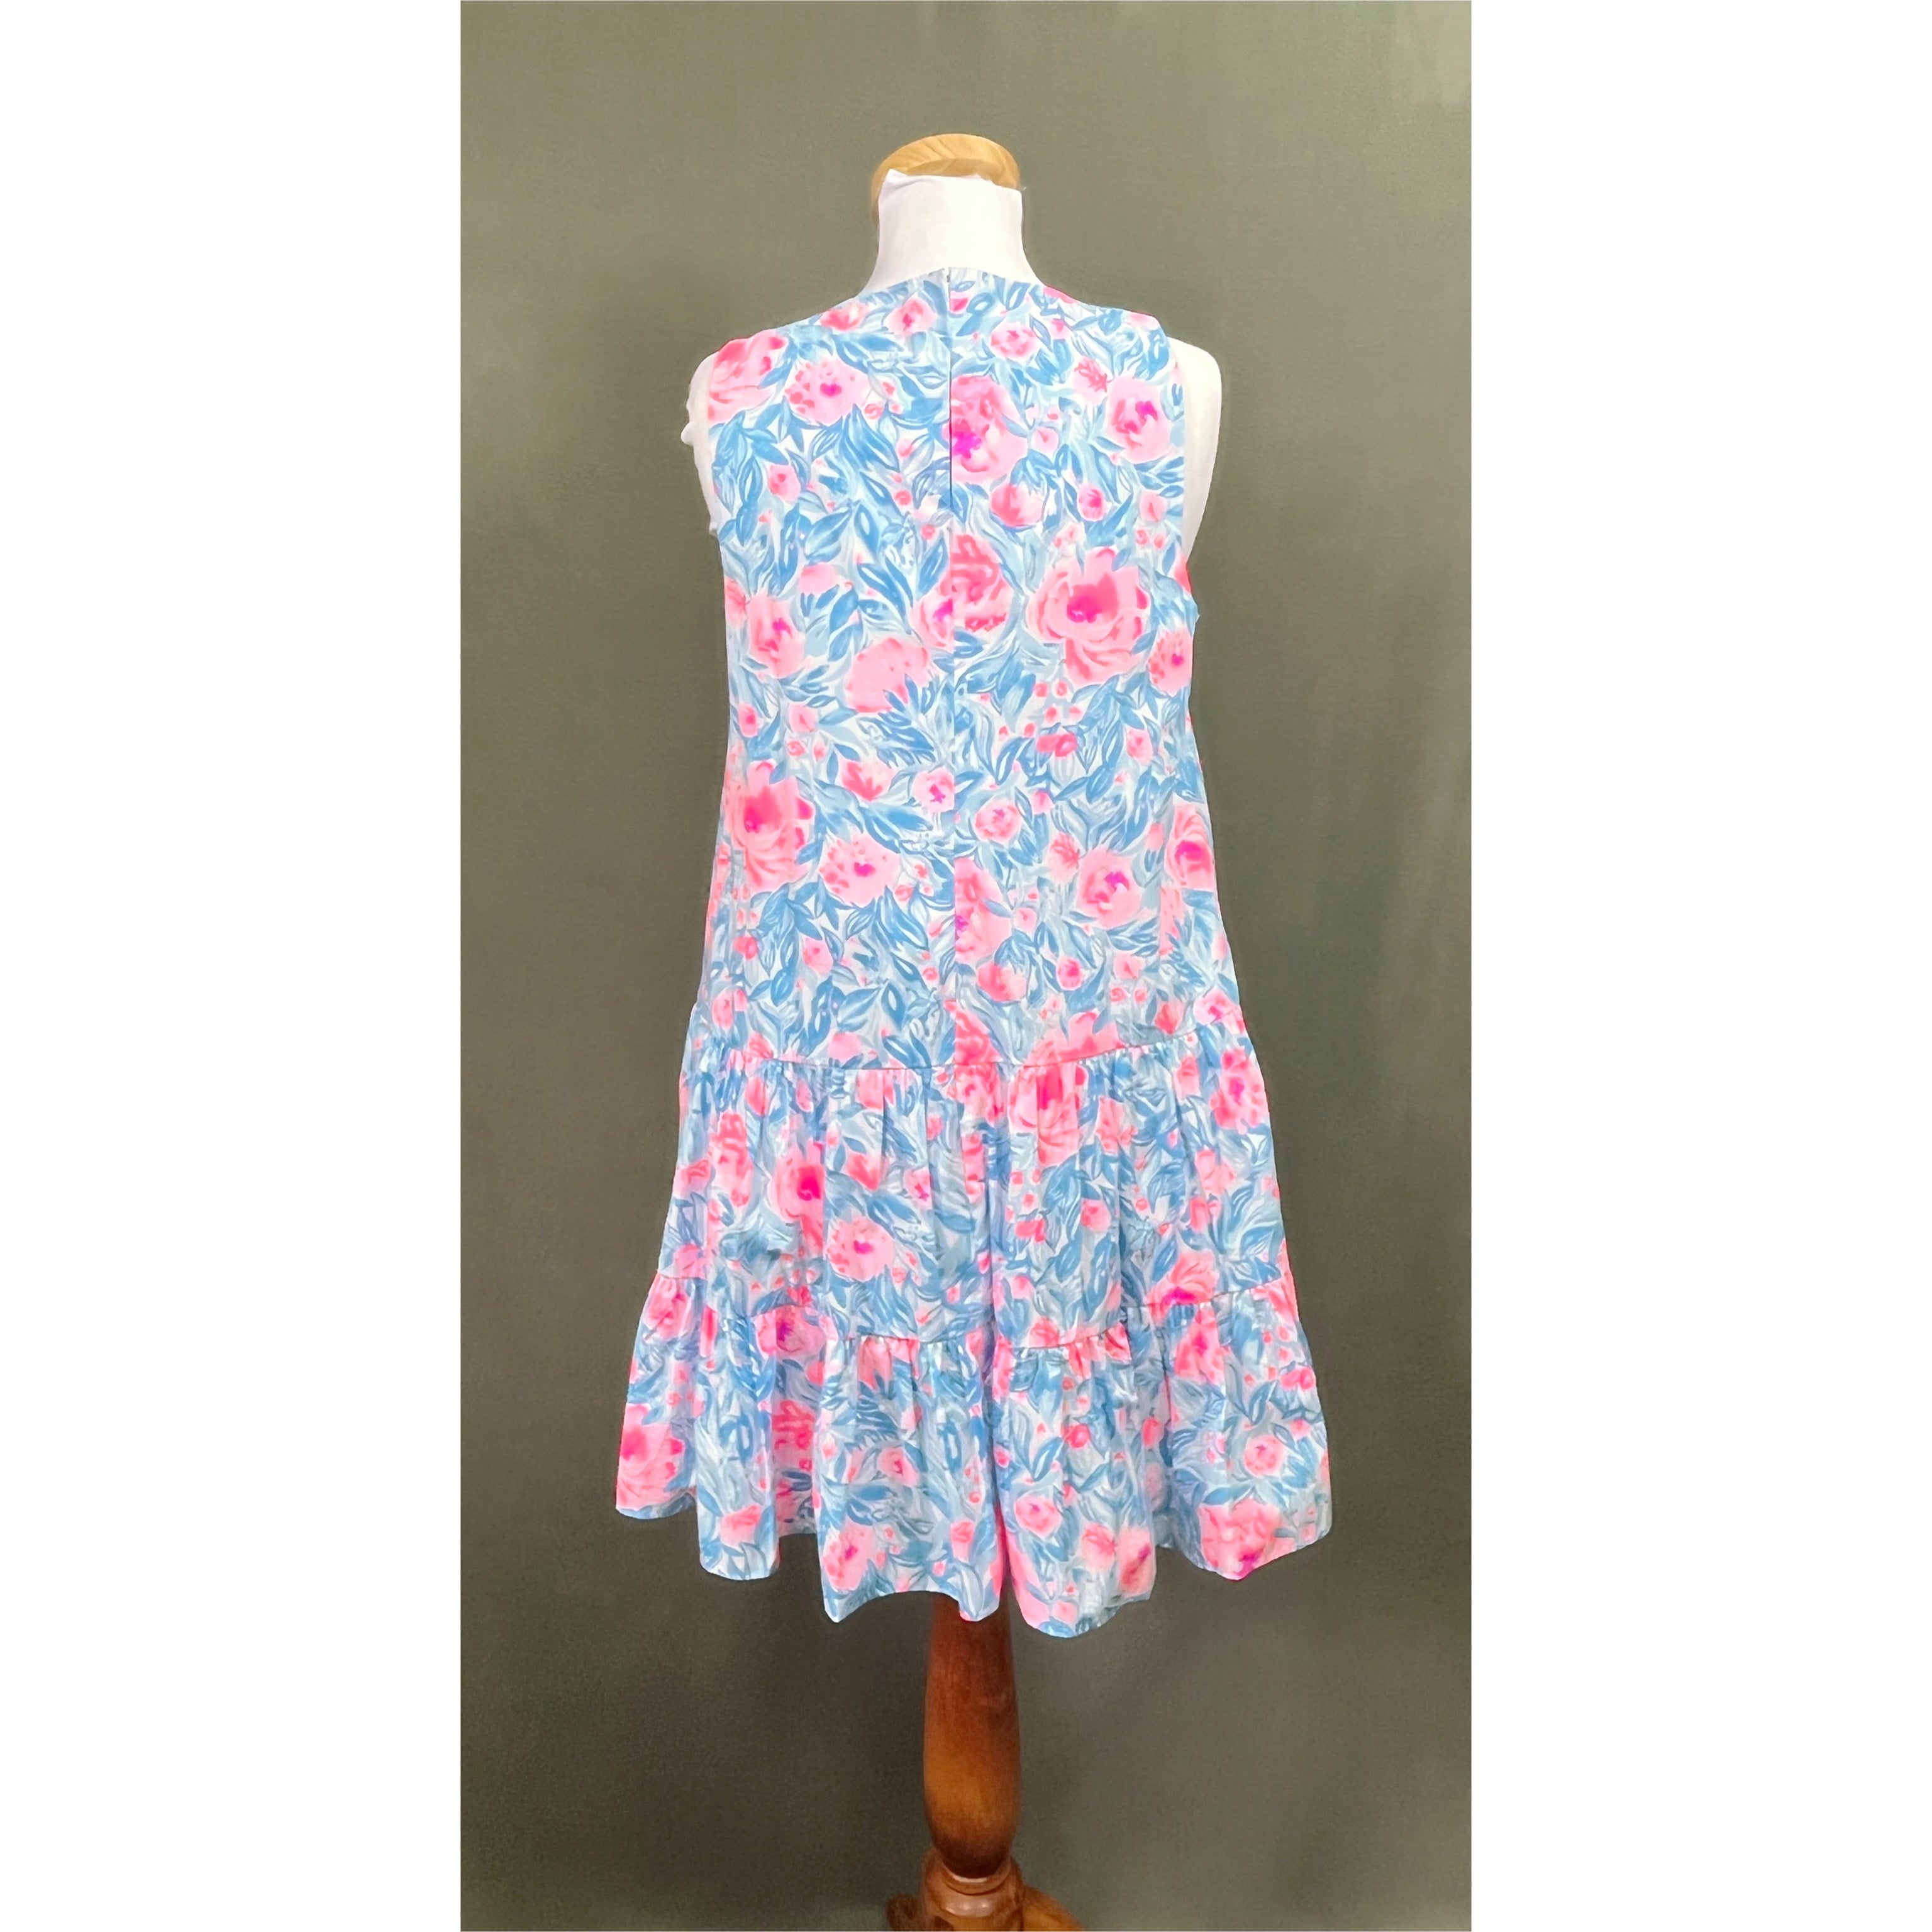 Lilly Pulitzer pink and light blue Trina dress, size M